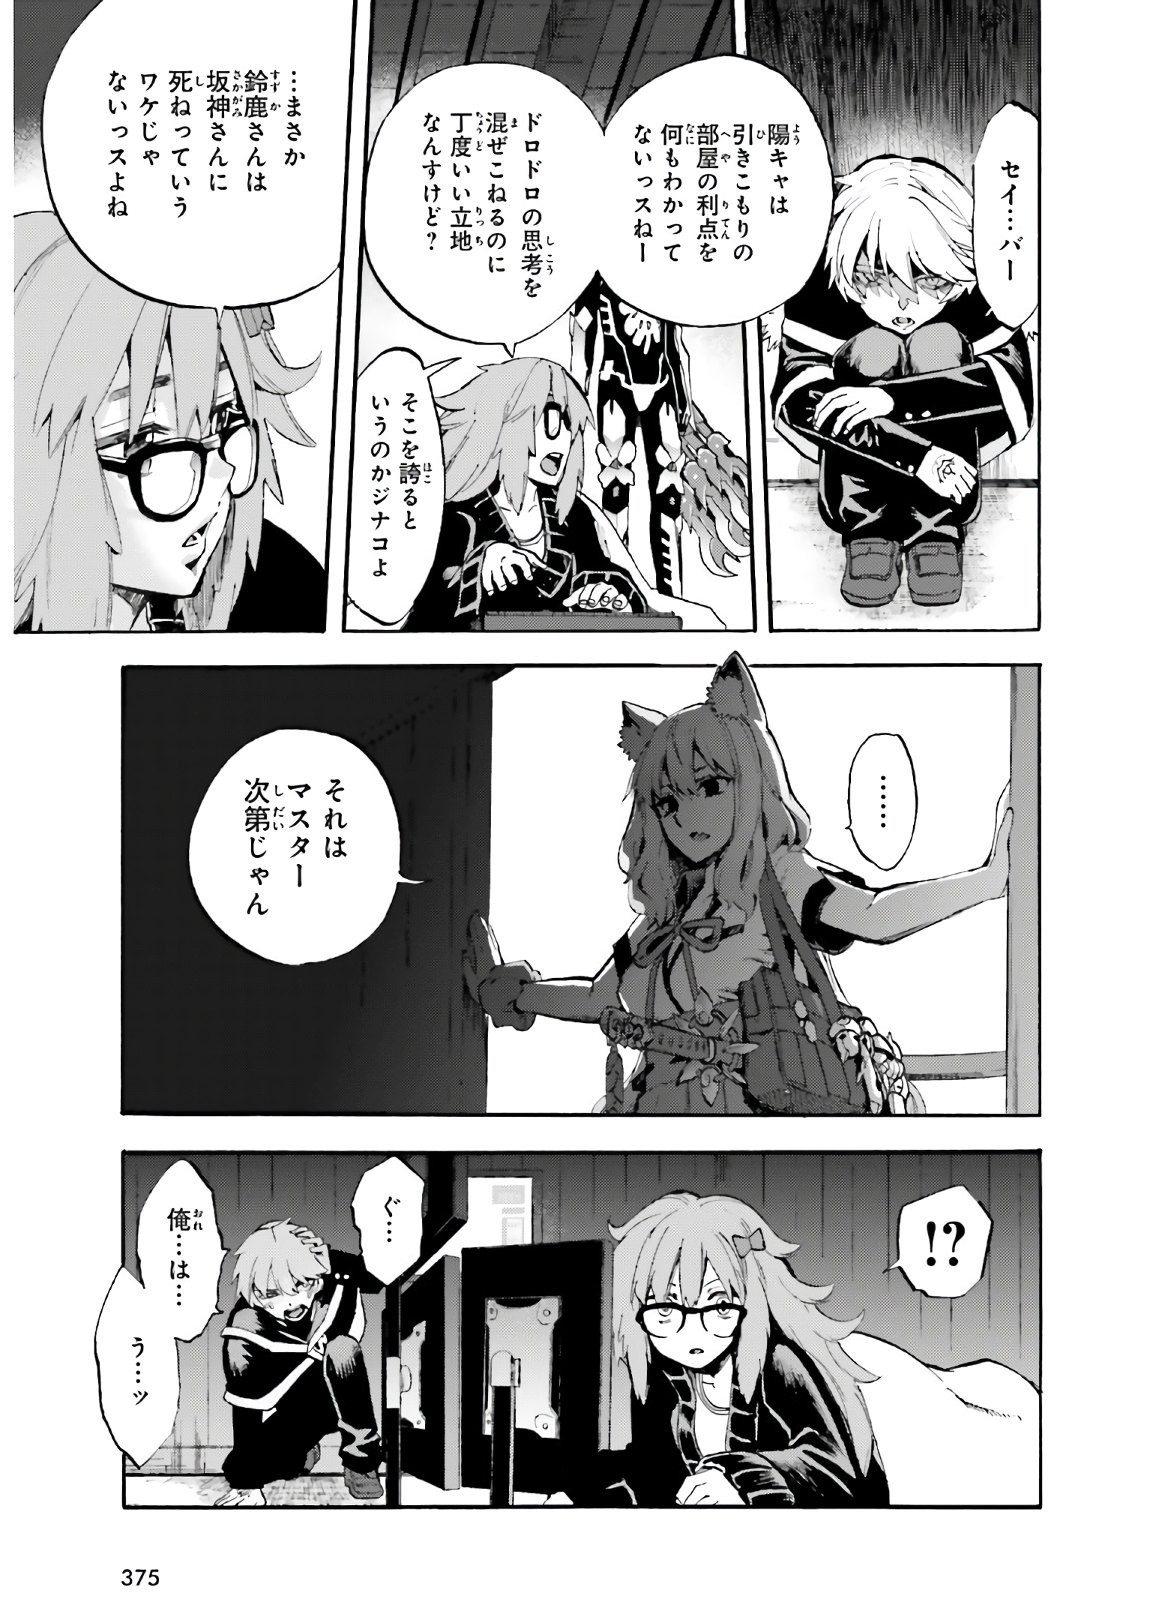 Fate Extra Ccc Fox Tail Chapter 63 Page 5 Raw Sen Manga